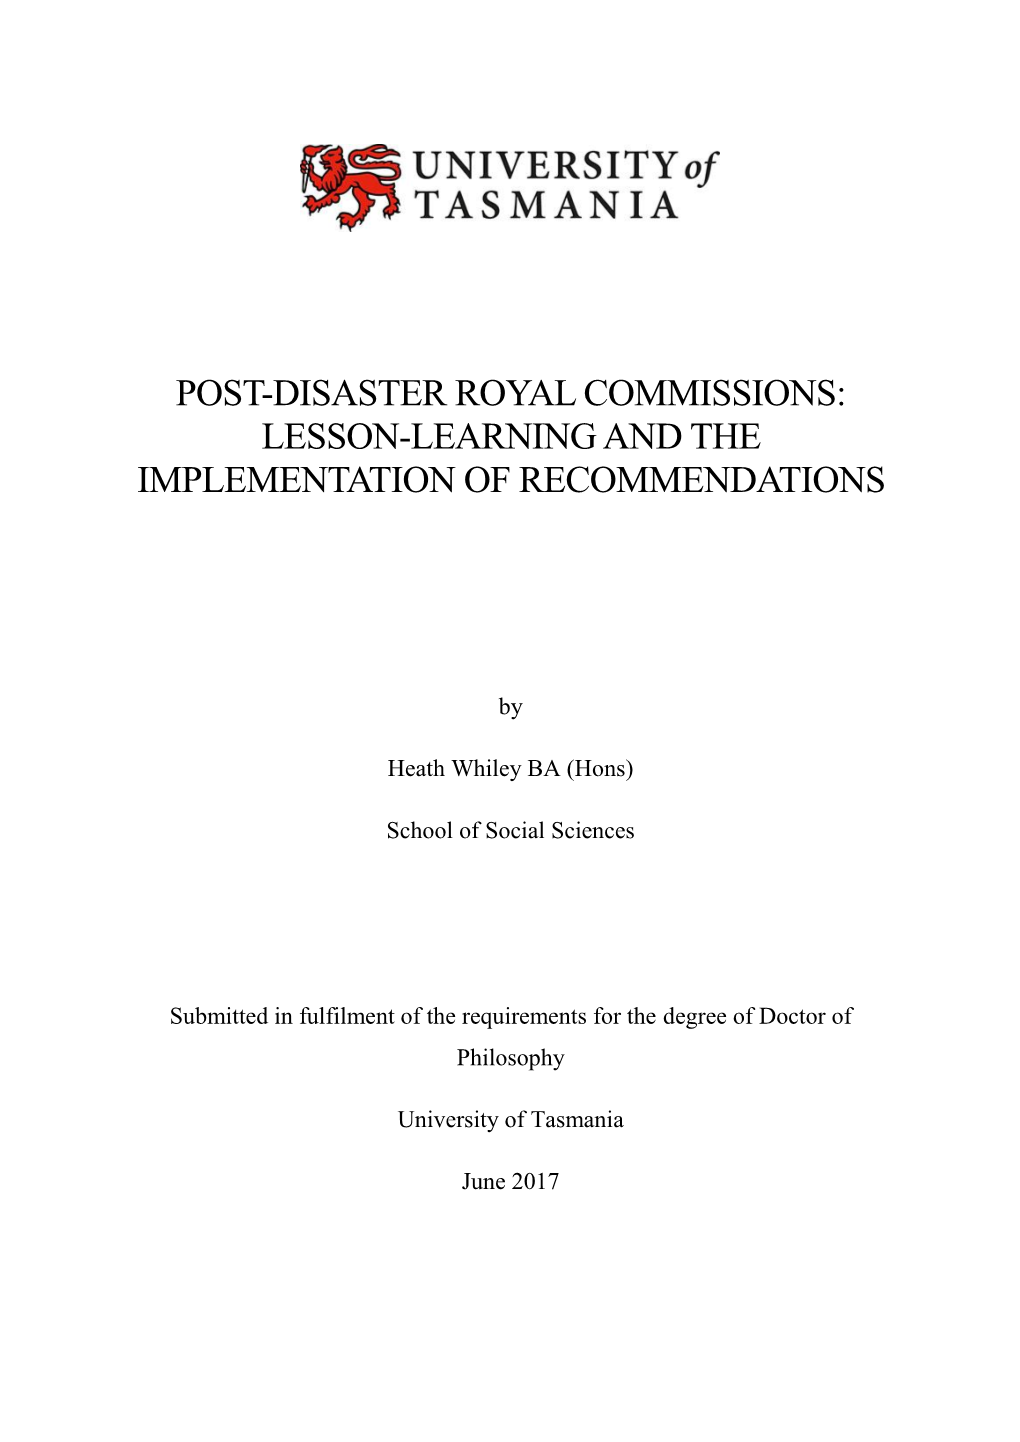 Post-Disaster Royal Commissions: Lesson-Learning and the Implementation of Recommendations